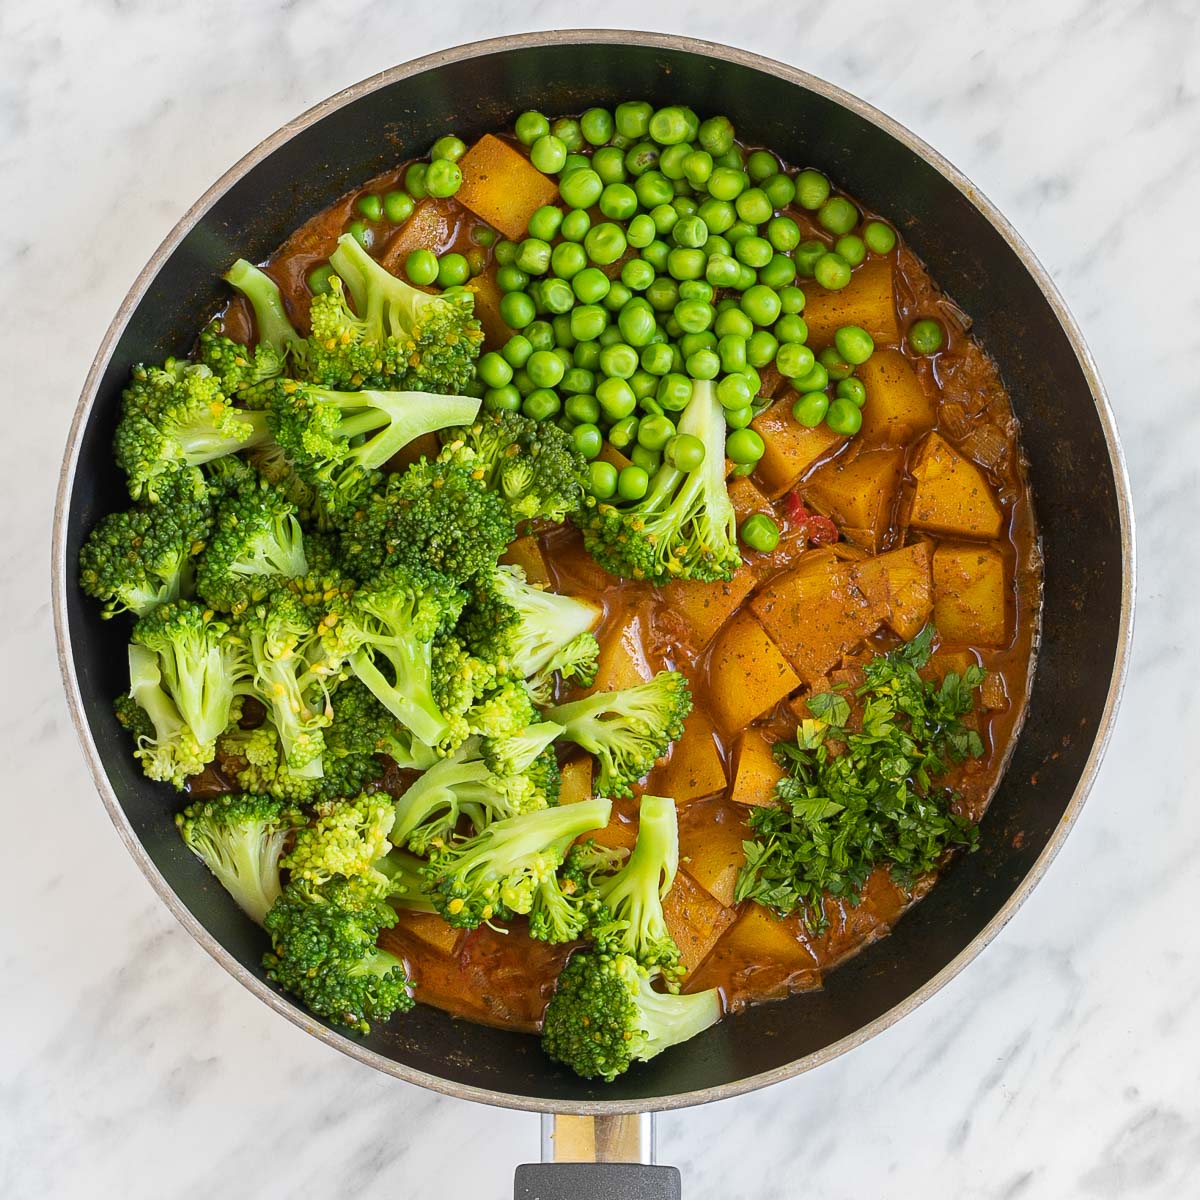 Diced potatoes in an orange sauce in a frying pan topped with broccoli florets and green peas.